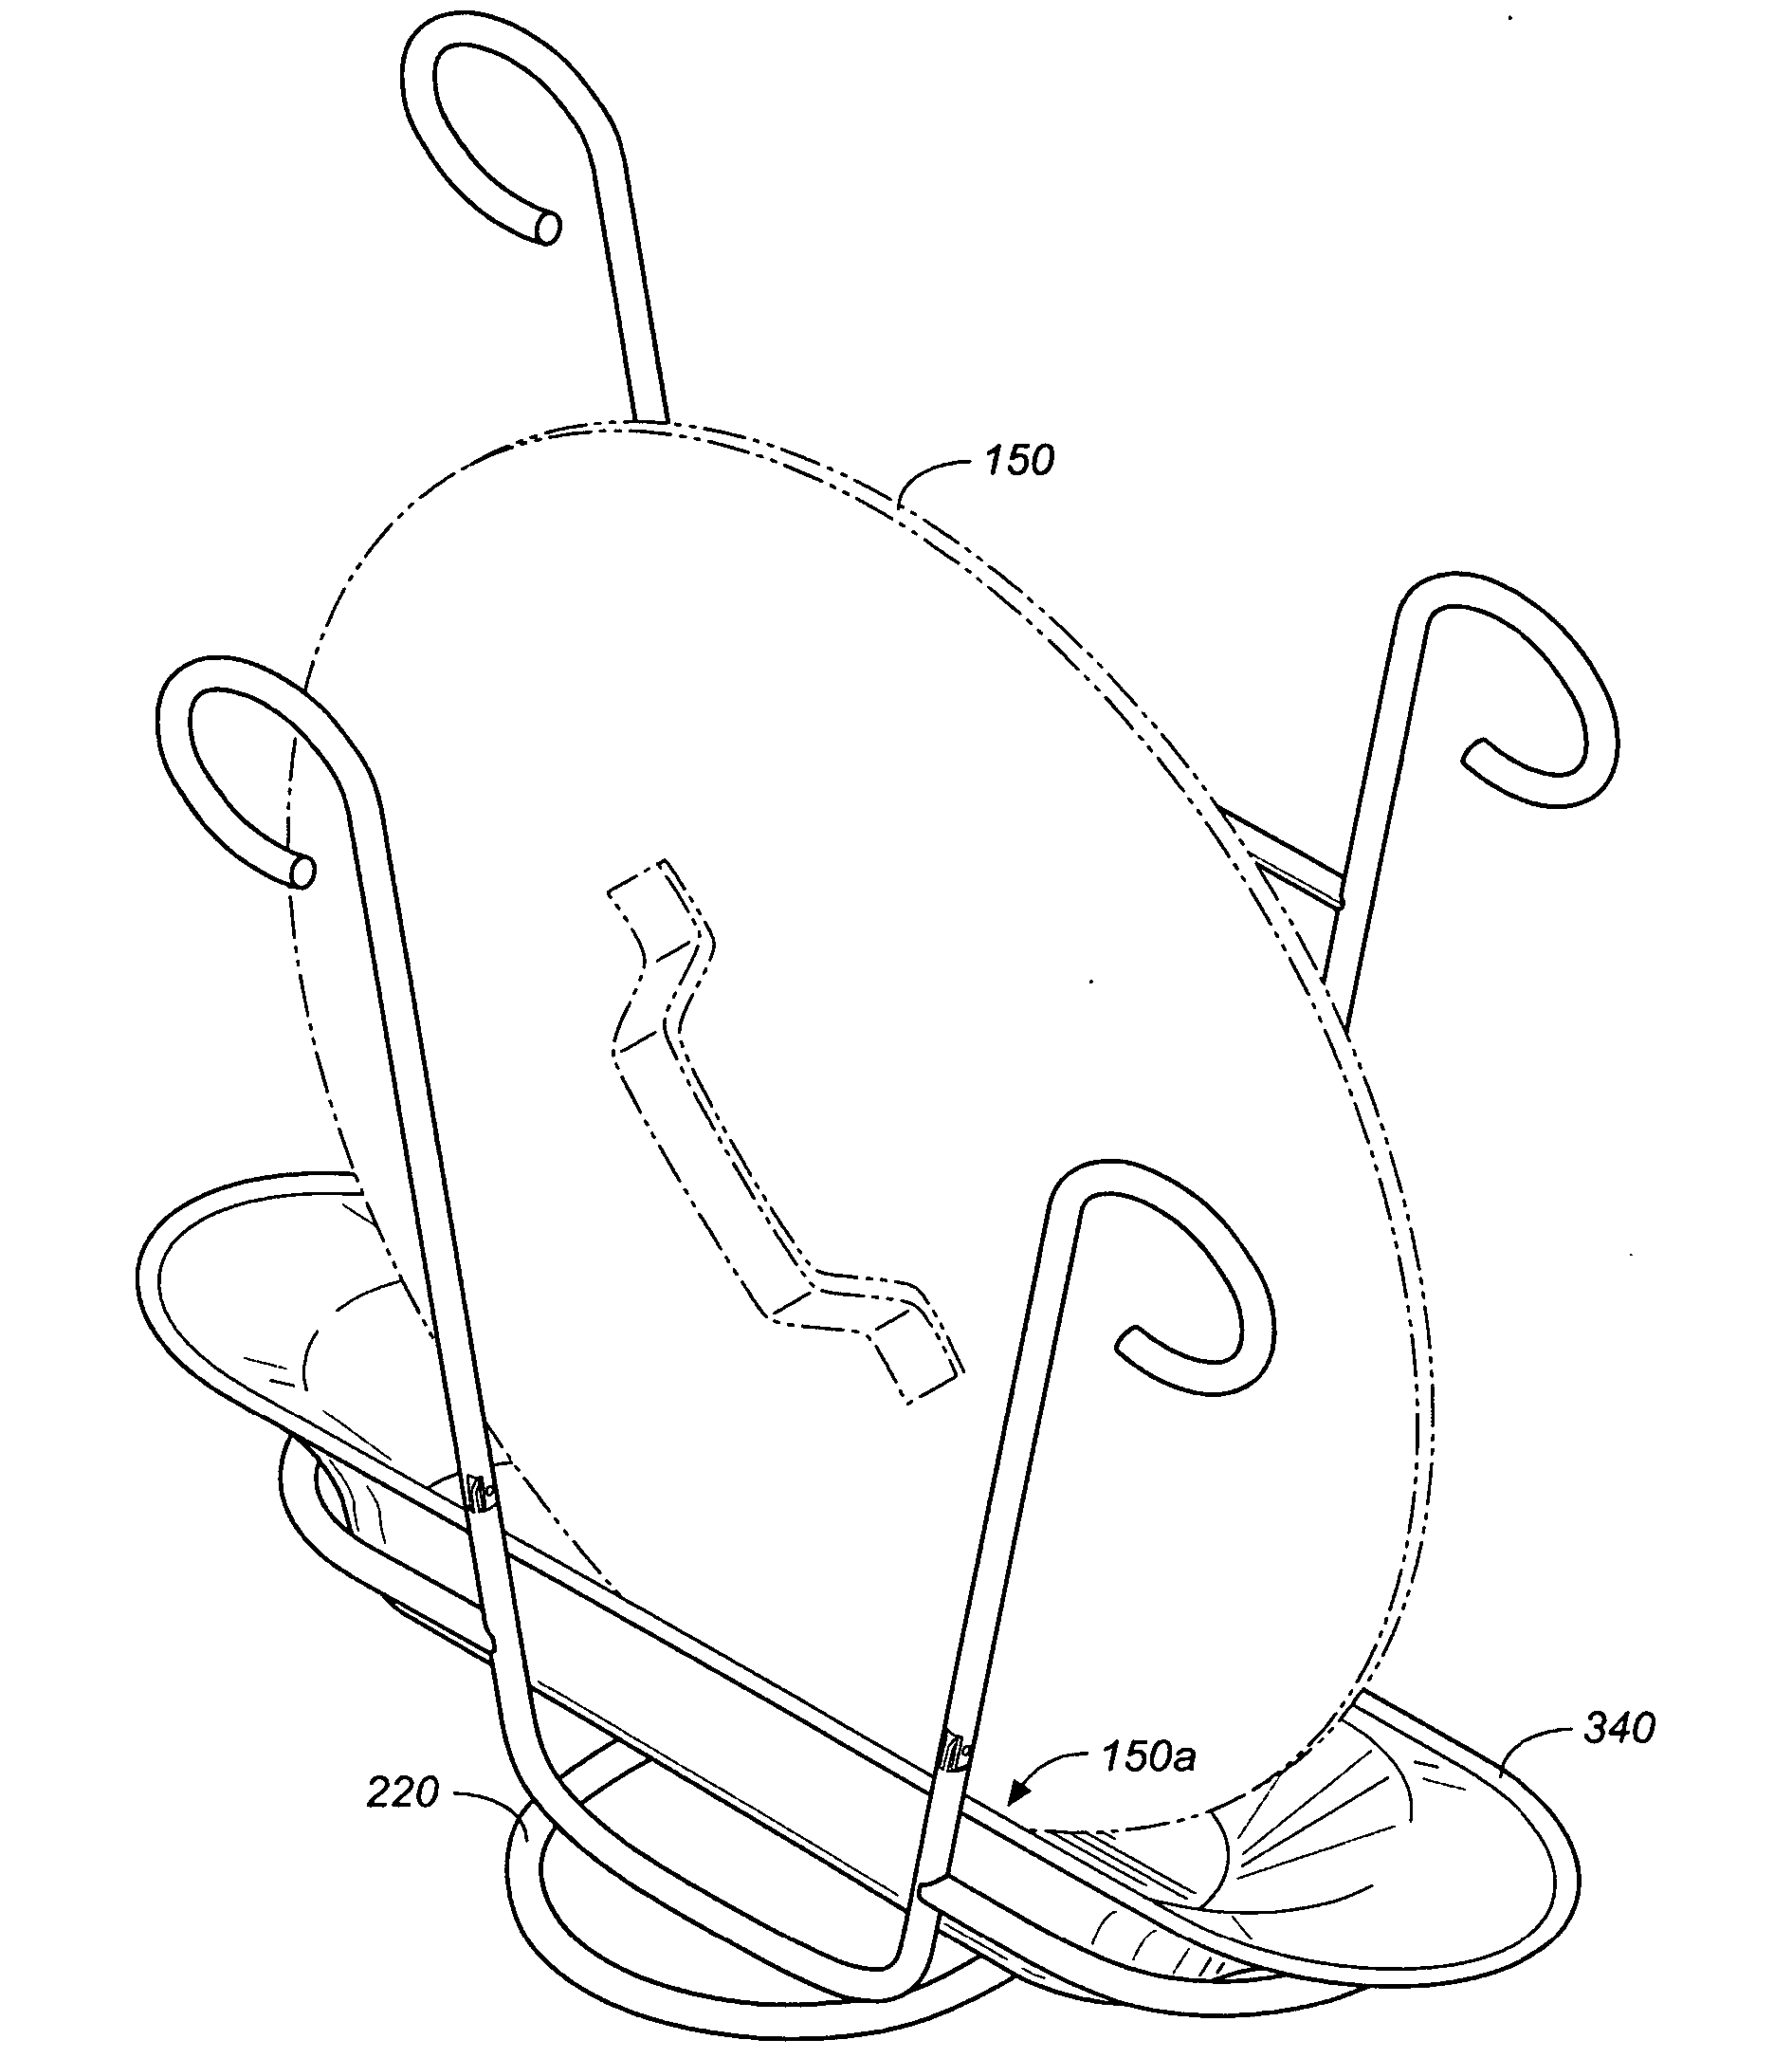 Cooking vessel lid holder with drip collection apparatus